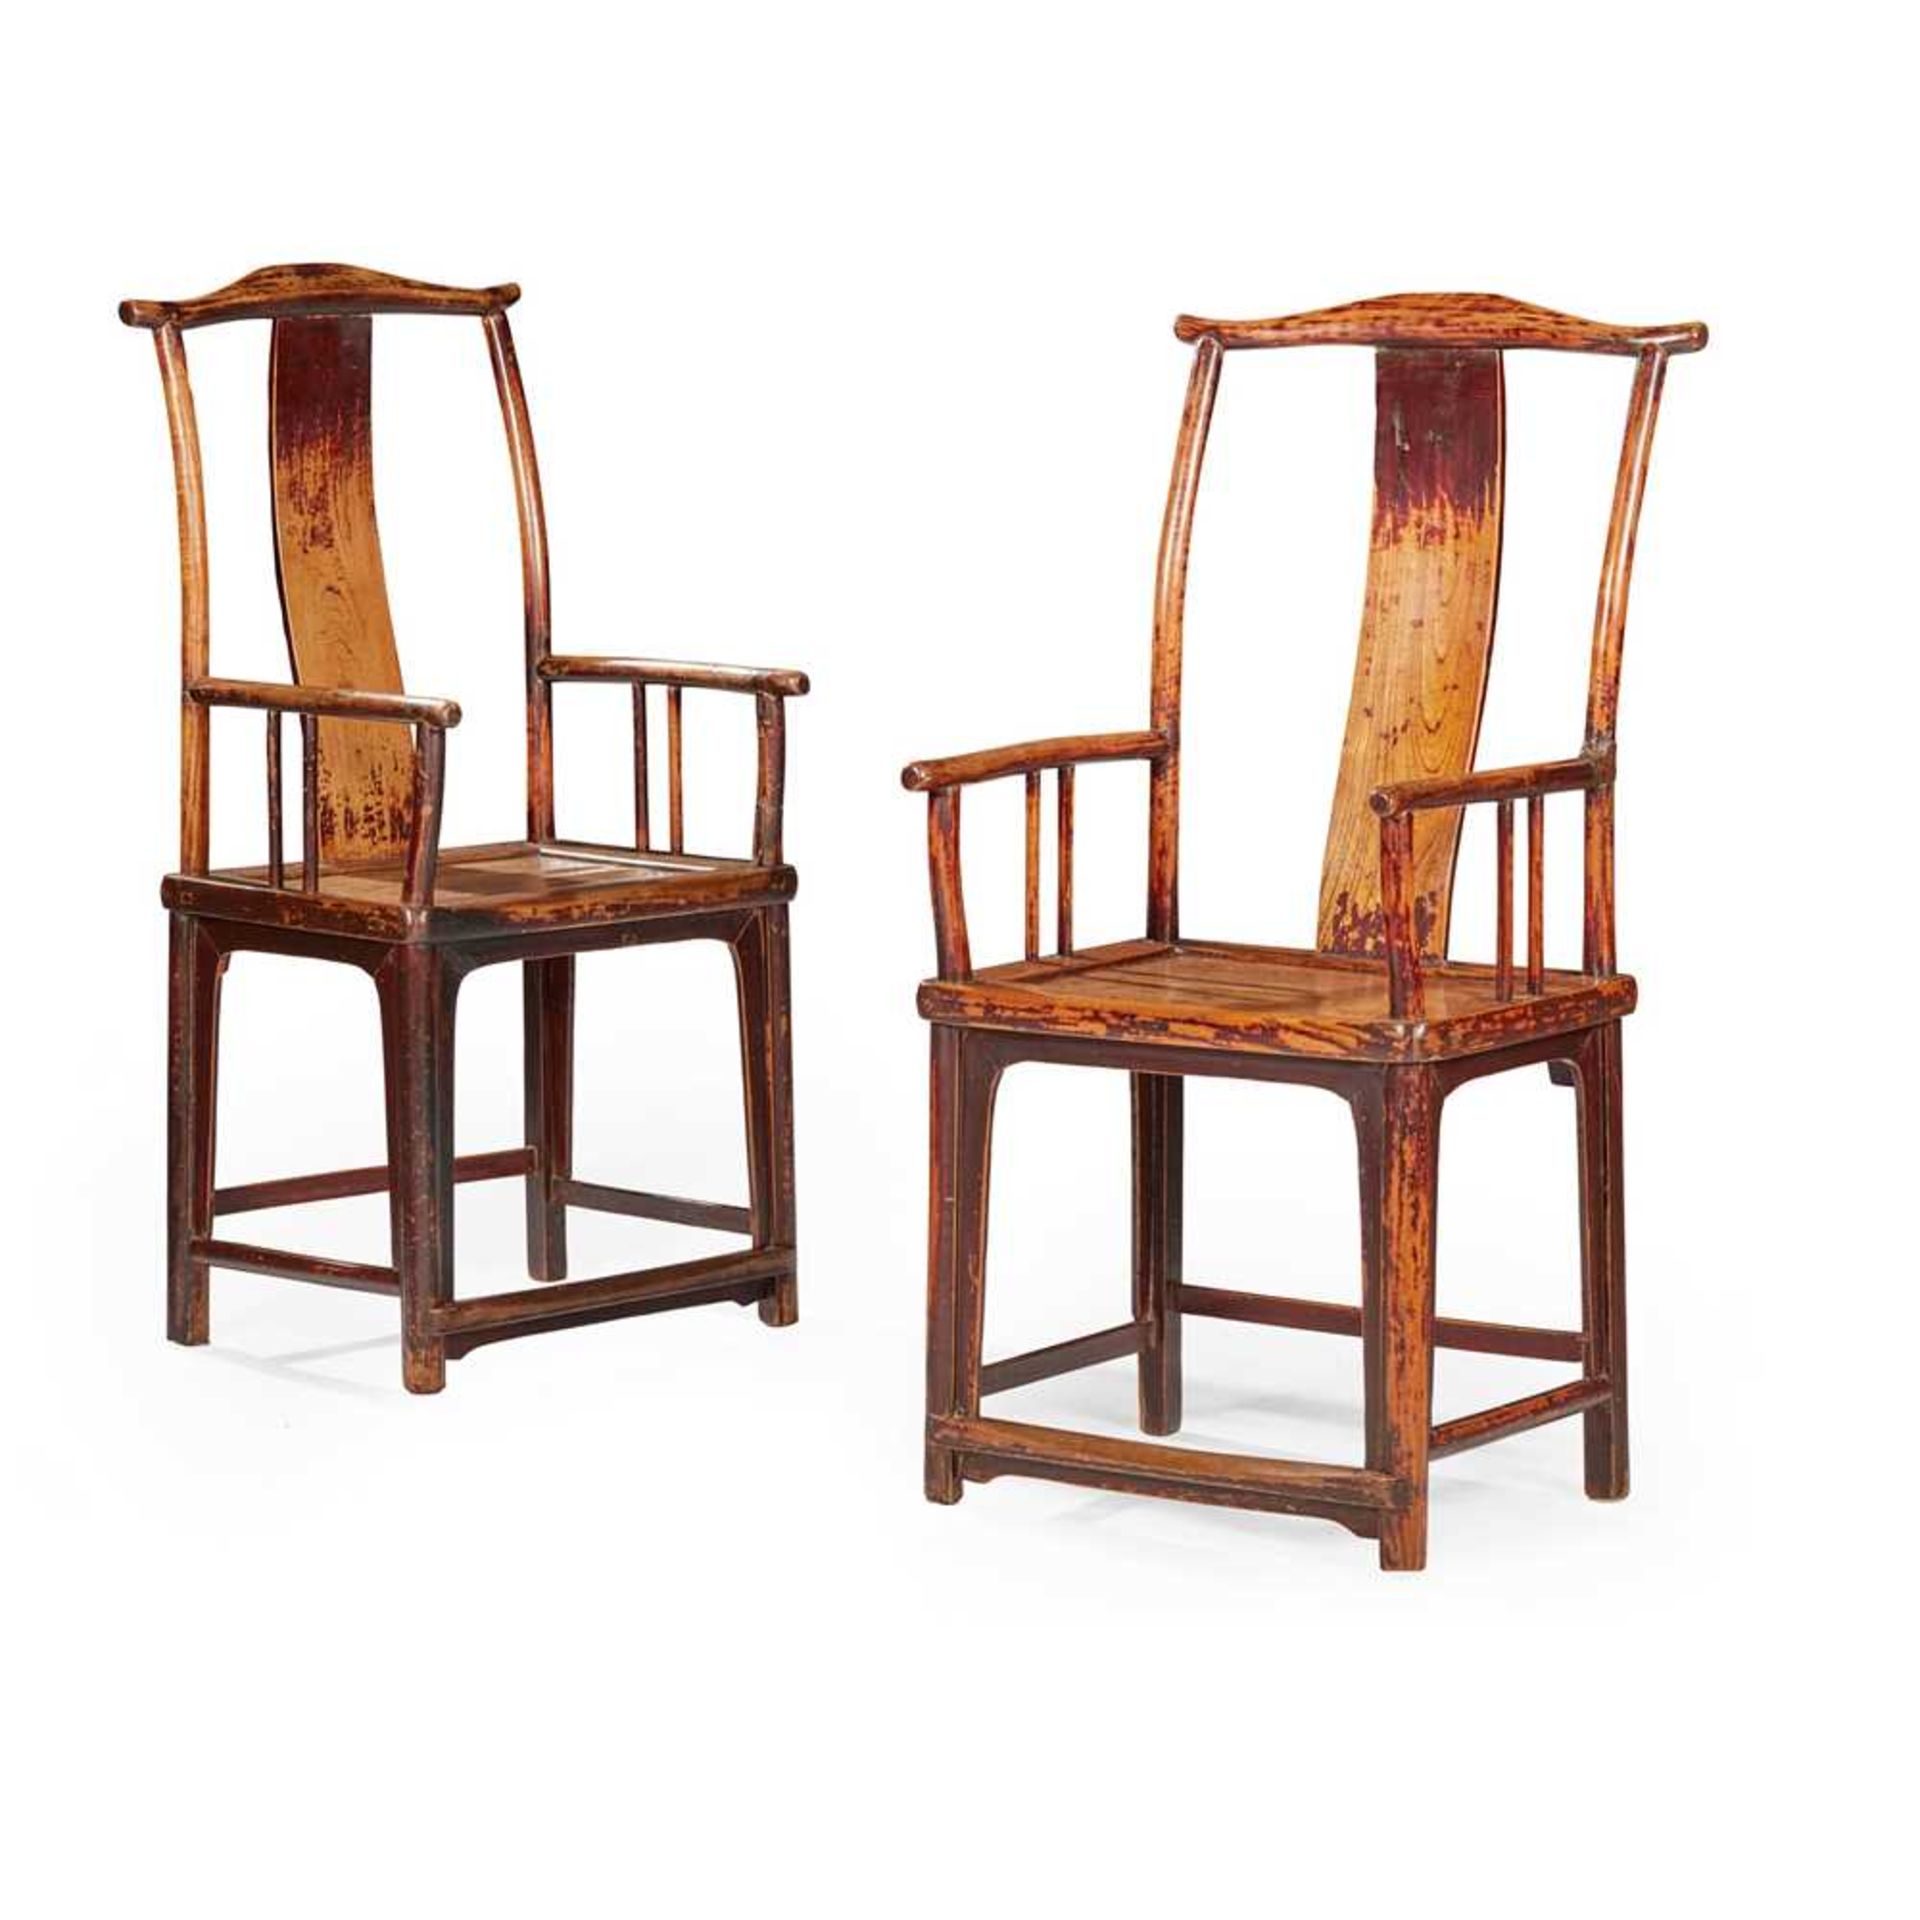 PAIR OF CHINESE YOKE-BACK ELM ARMCHAIRS QING DYNASTY, 19TH CENTURY